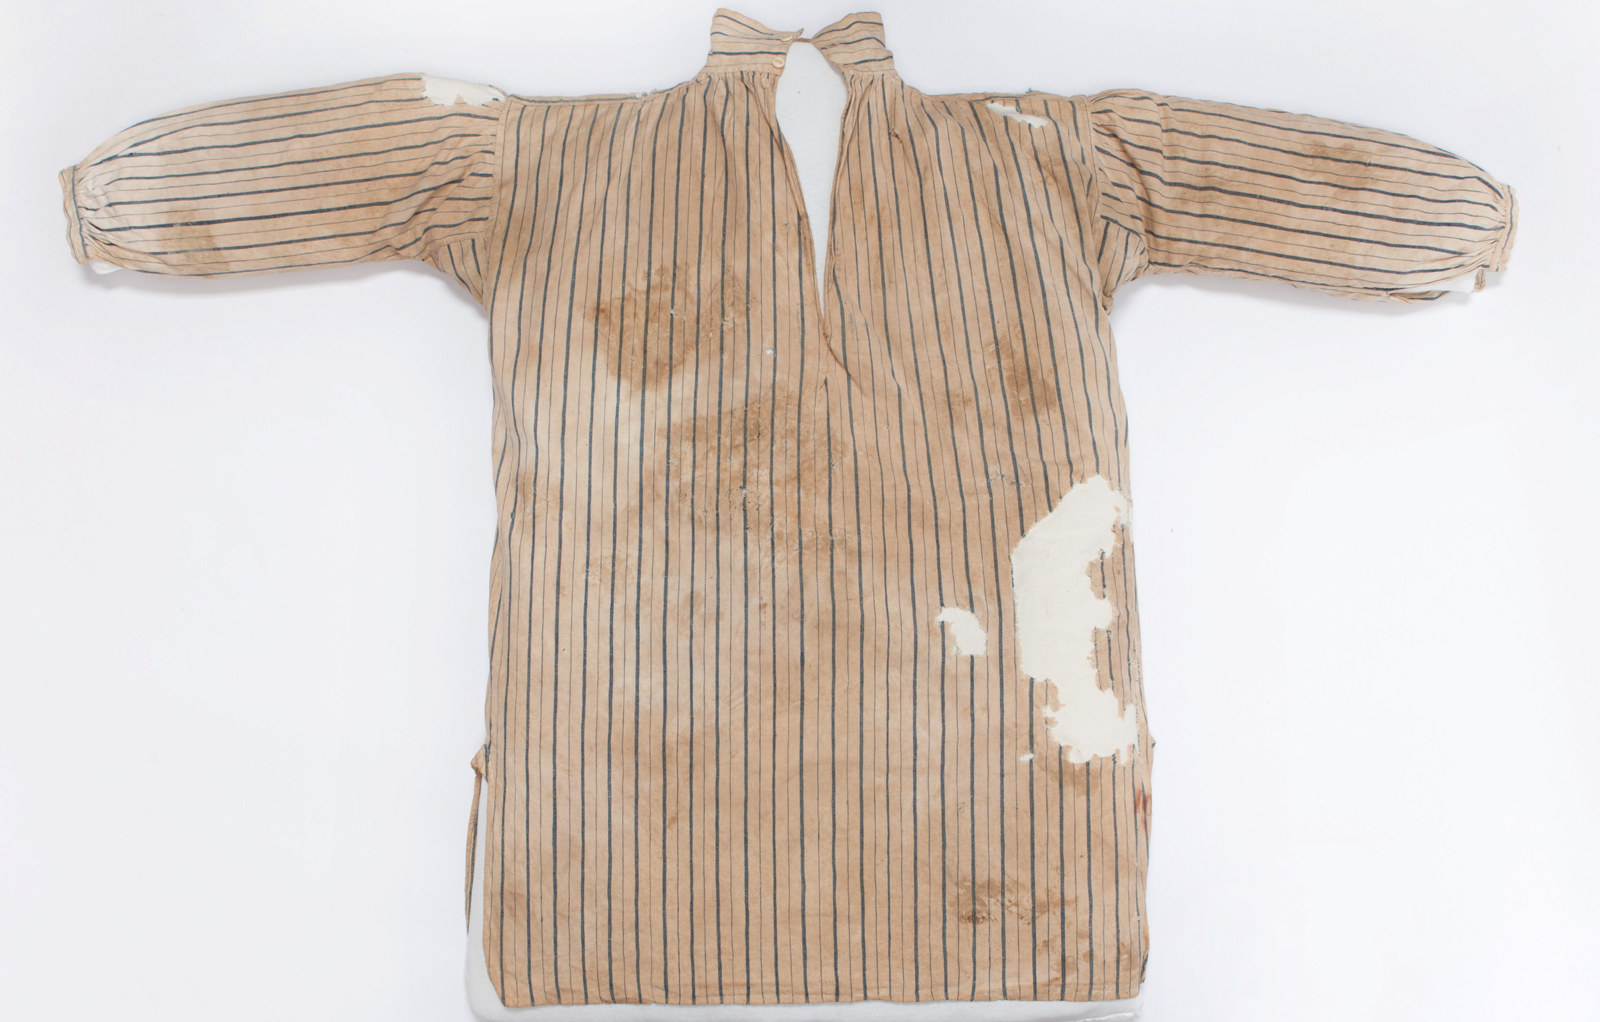 Convict shirt made of blue and white striped Indian cotton, circa 1840